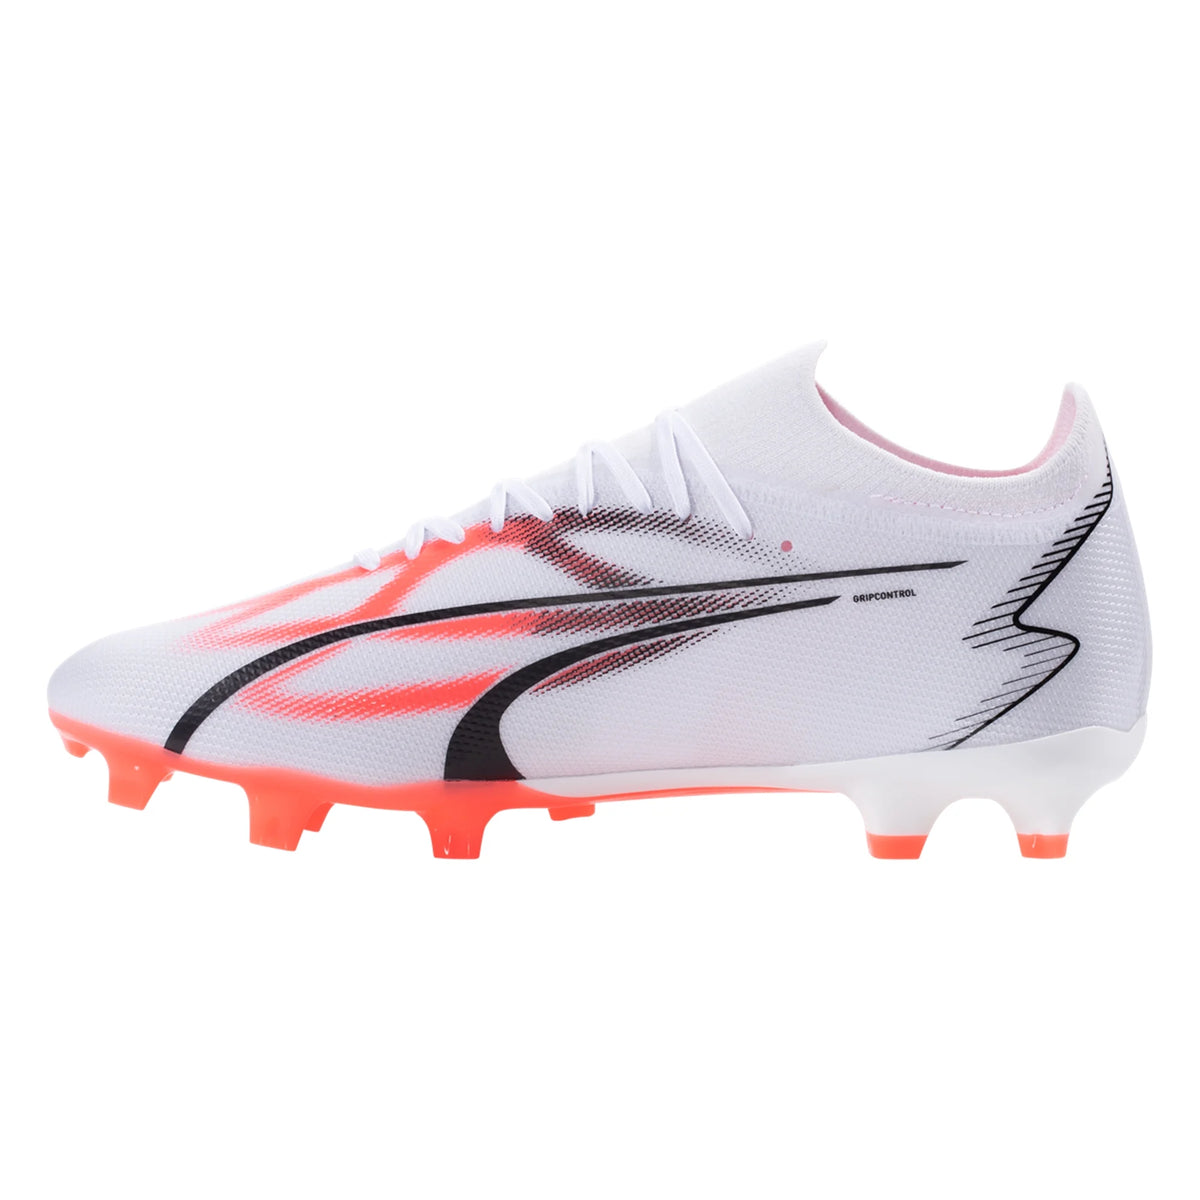 107347-01 USA Ground Ultra - Soccer Firm Cleat Orchid Match – Zone Puma FG/AG White/Black/Fire Soccer